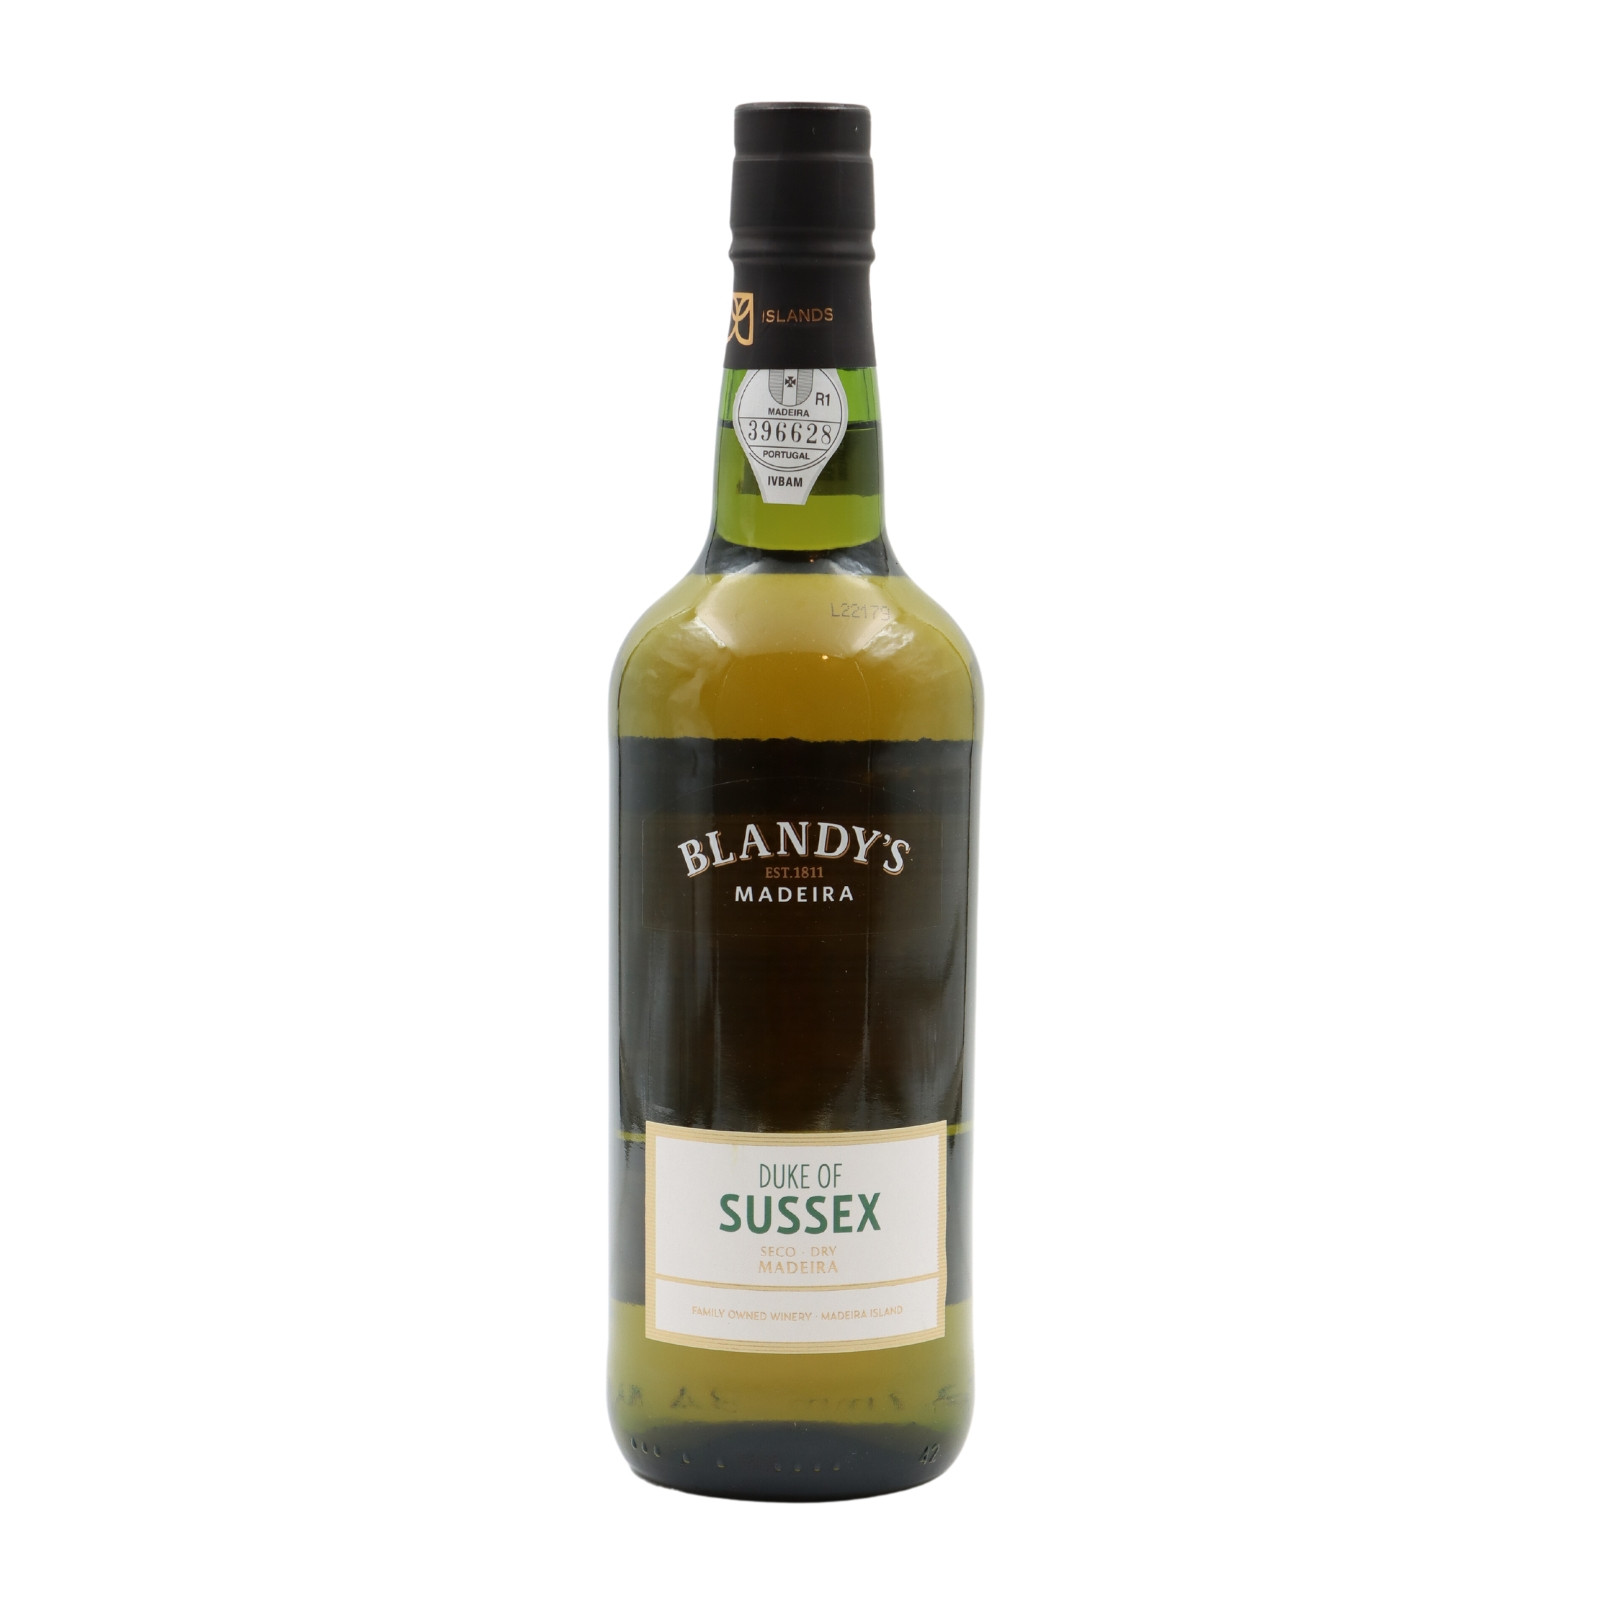 Blandys Duke of Sussex Special Dry Madeira